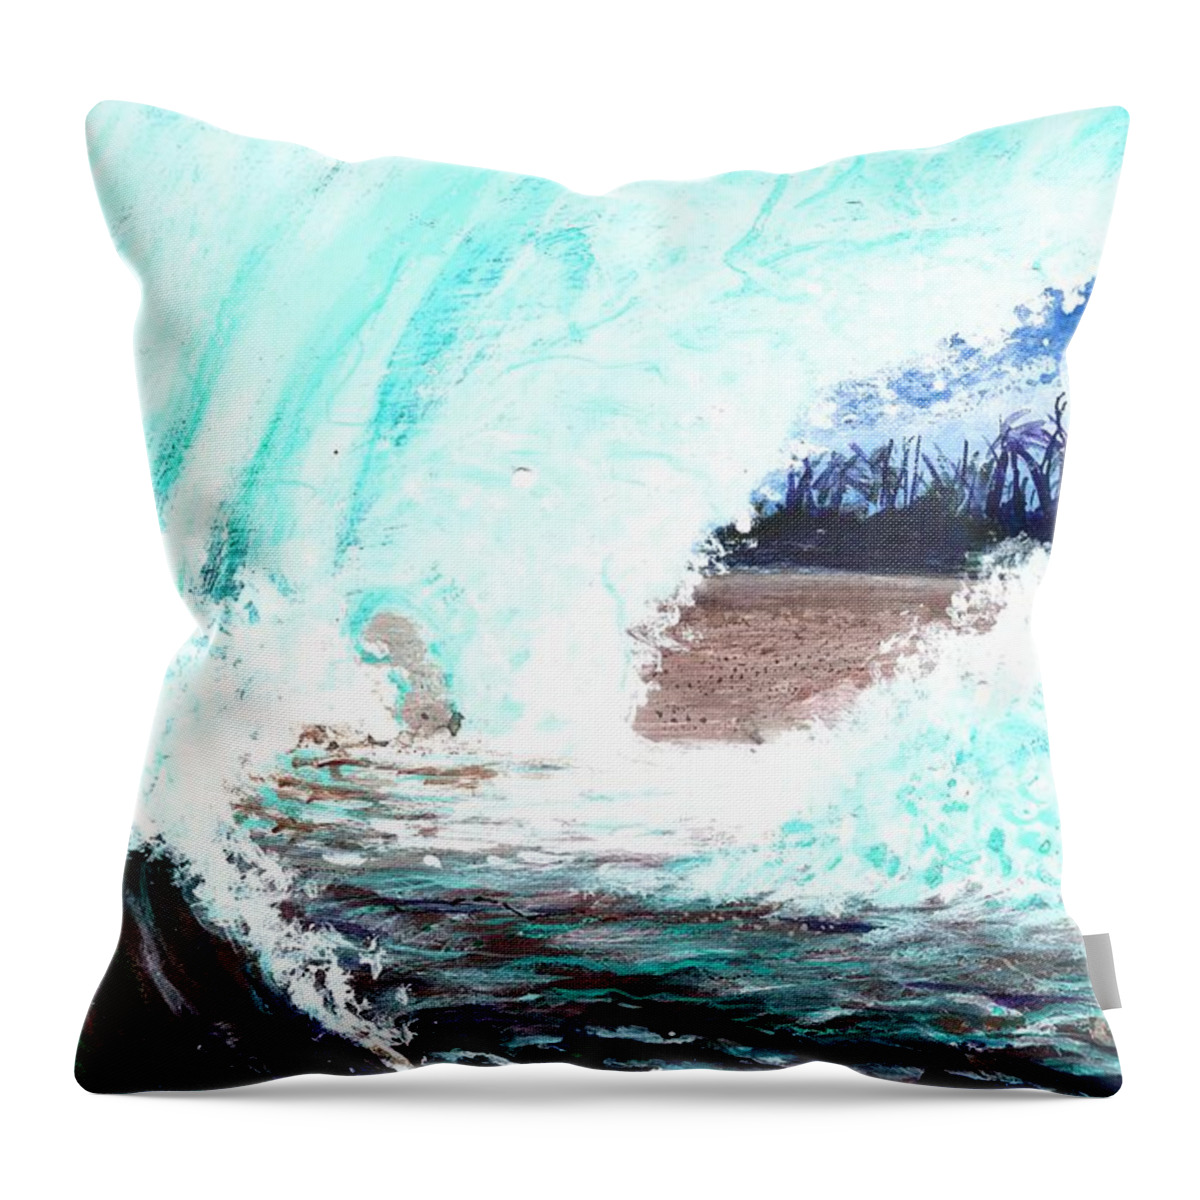 #wave #ocean #beach #sea #water #surfing #pipeline Throw Pillow featuring the painting The Wave by Allison Constantino